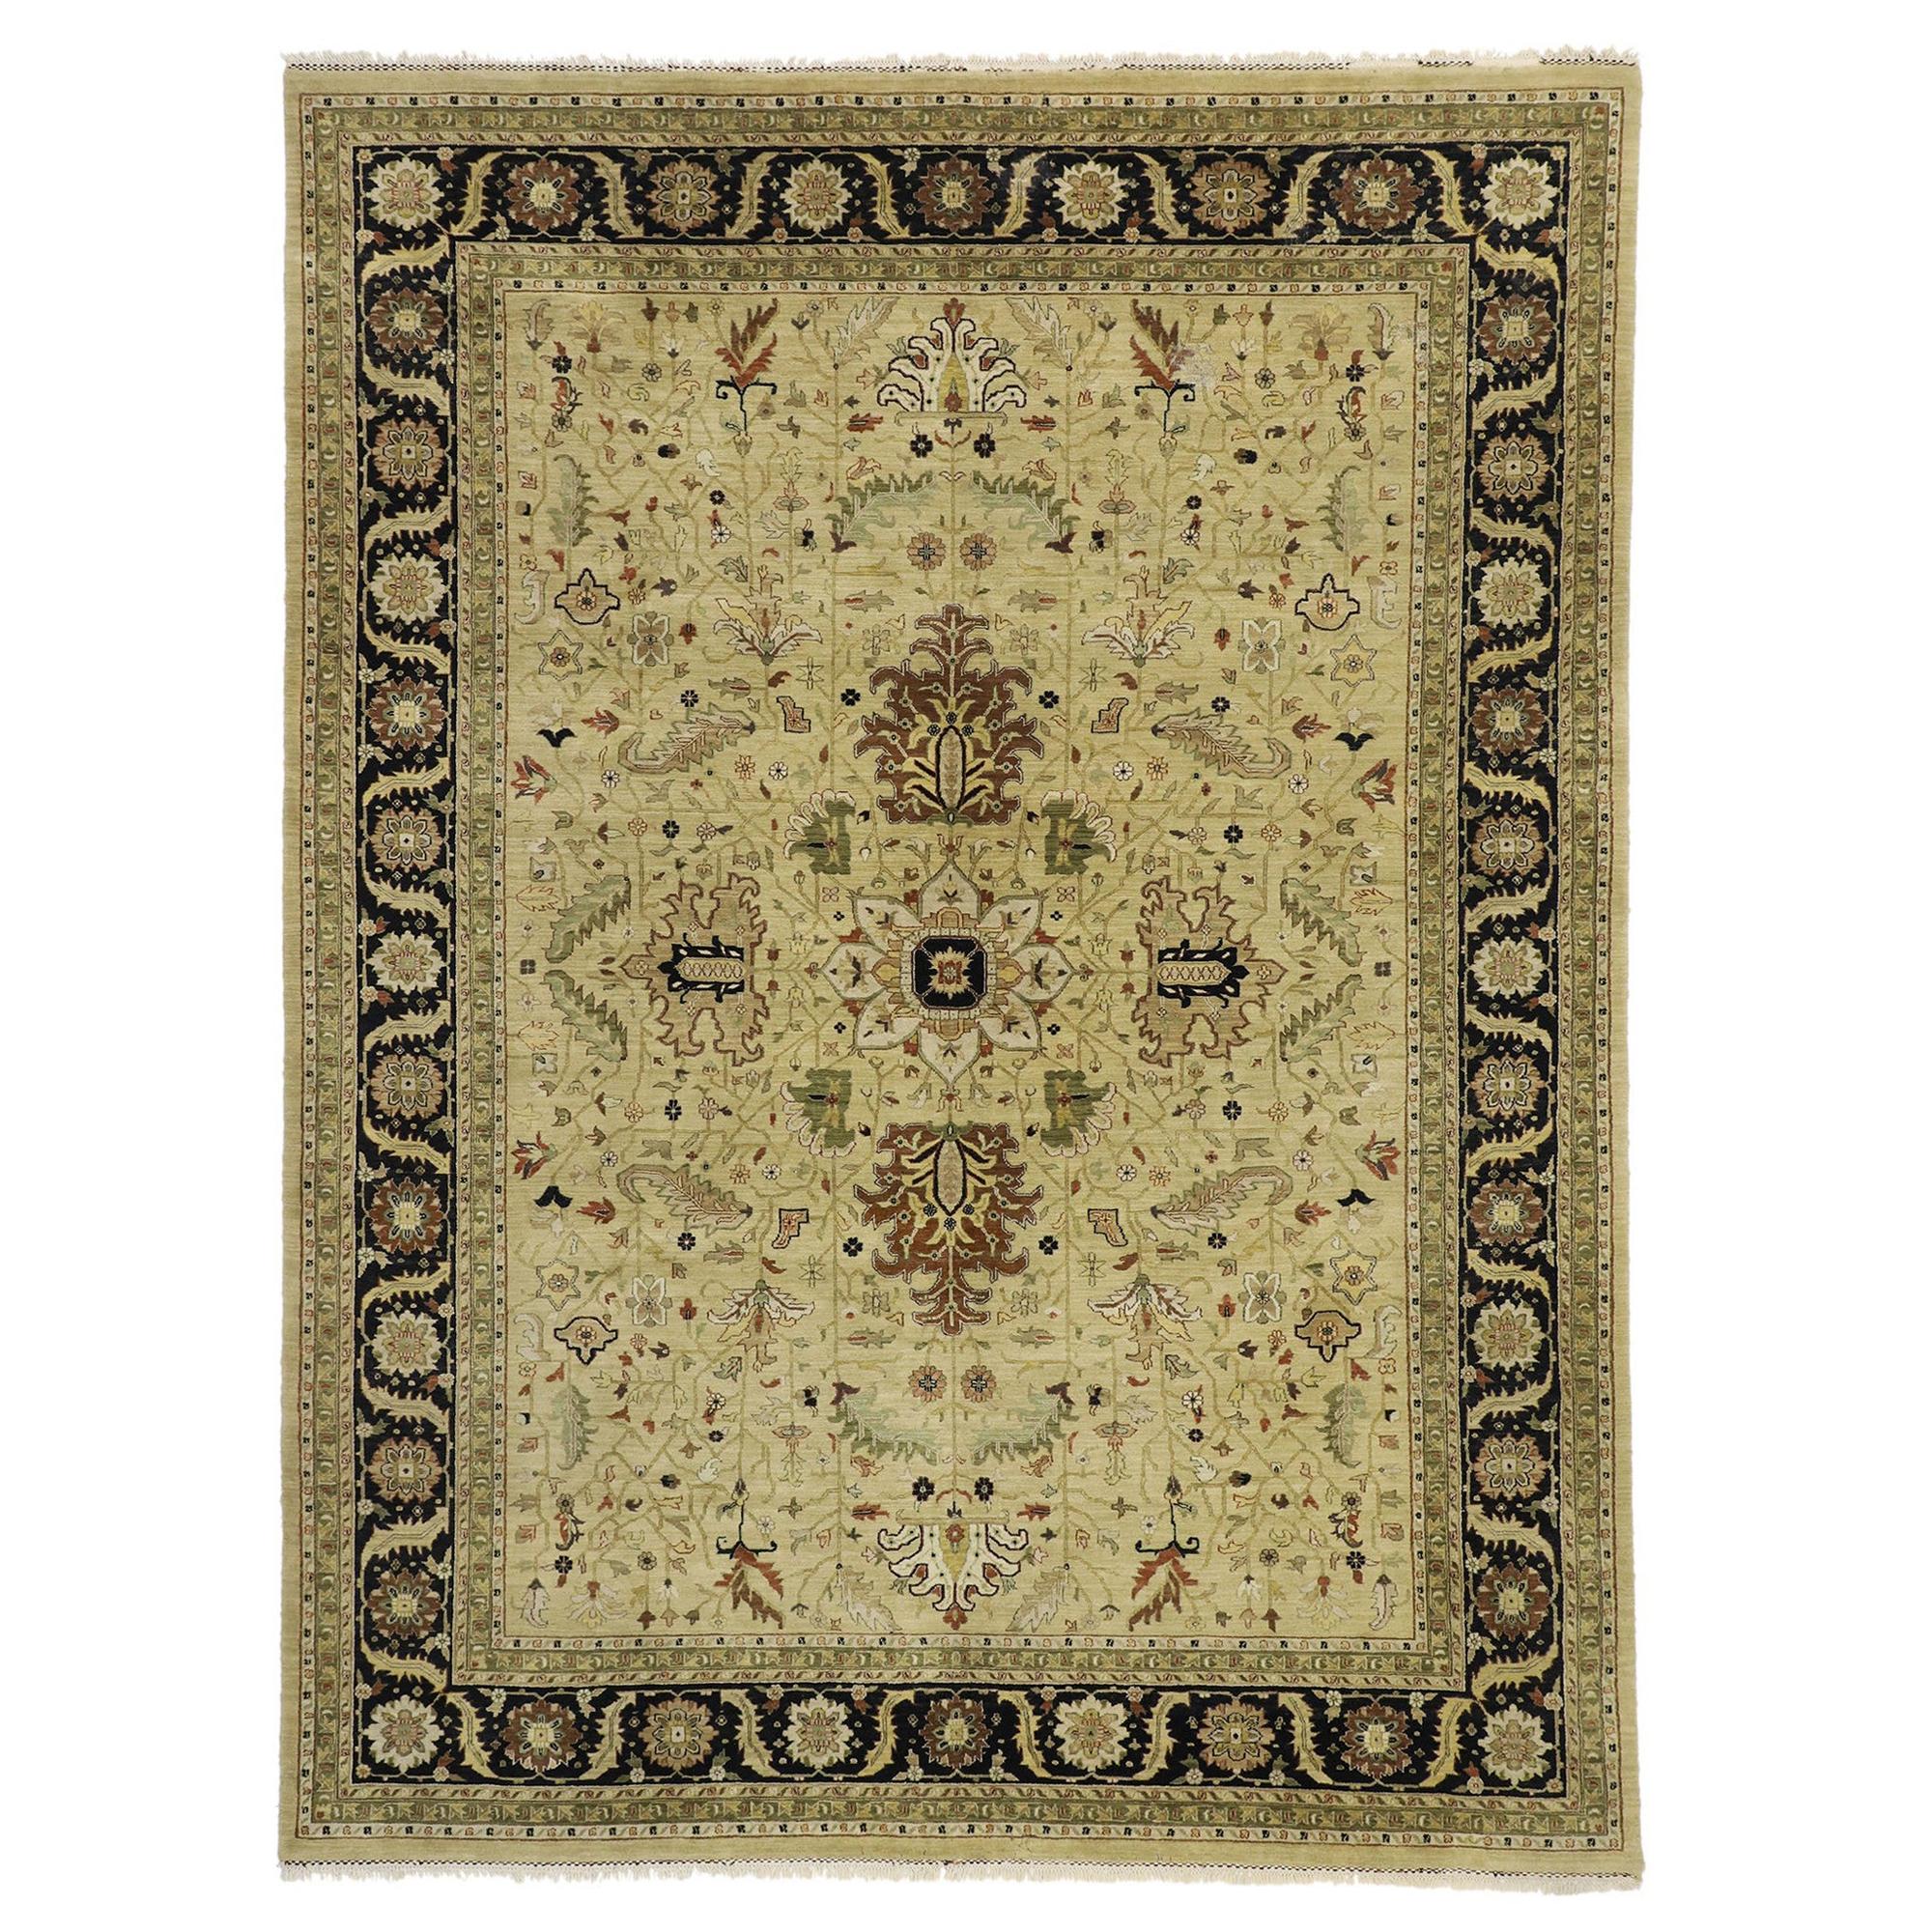 Vintage Indian Rug with Classic Colonial Revival Style